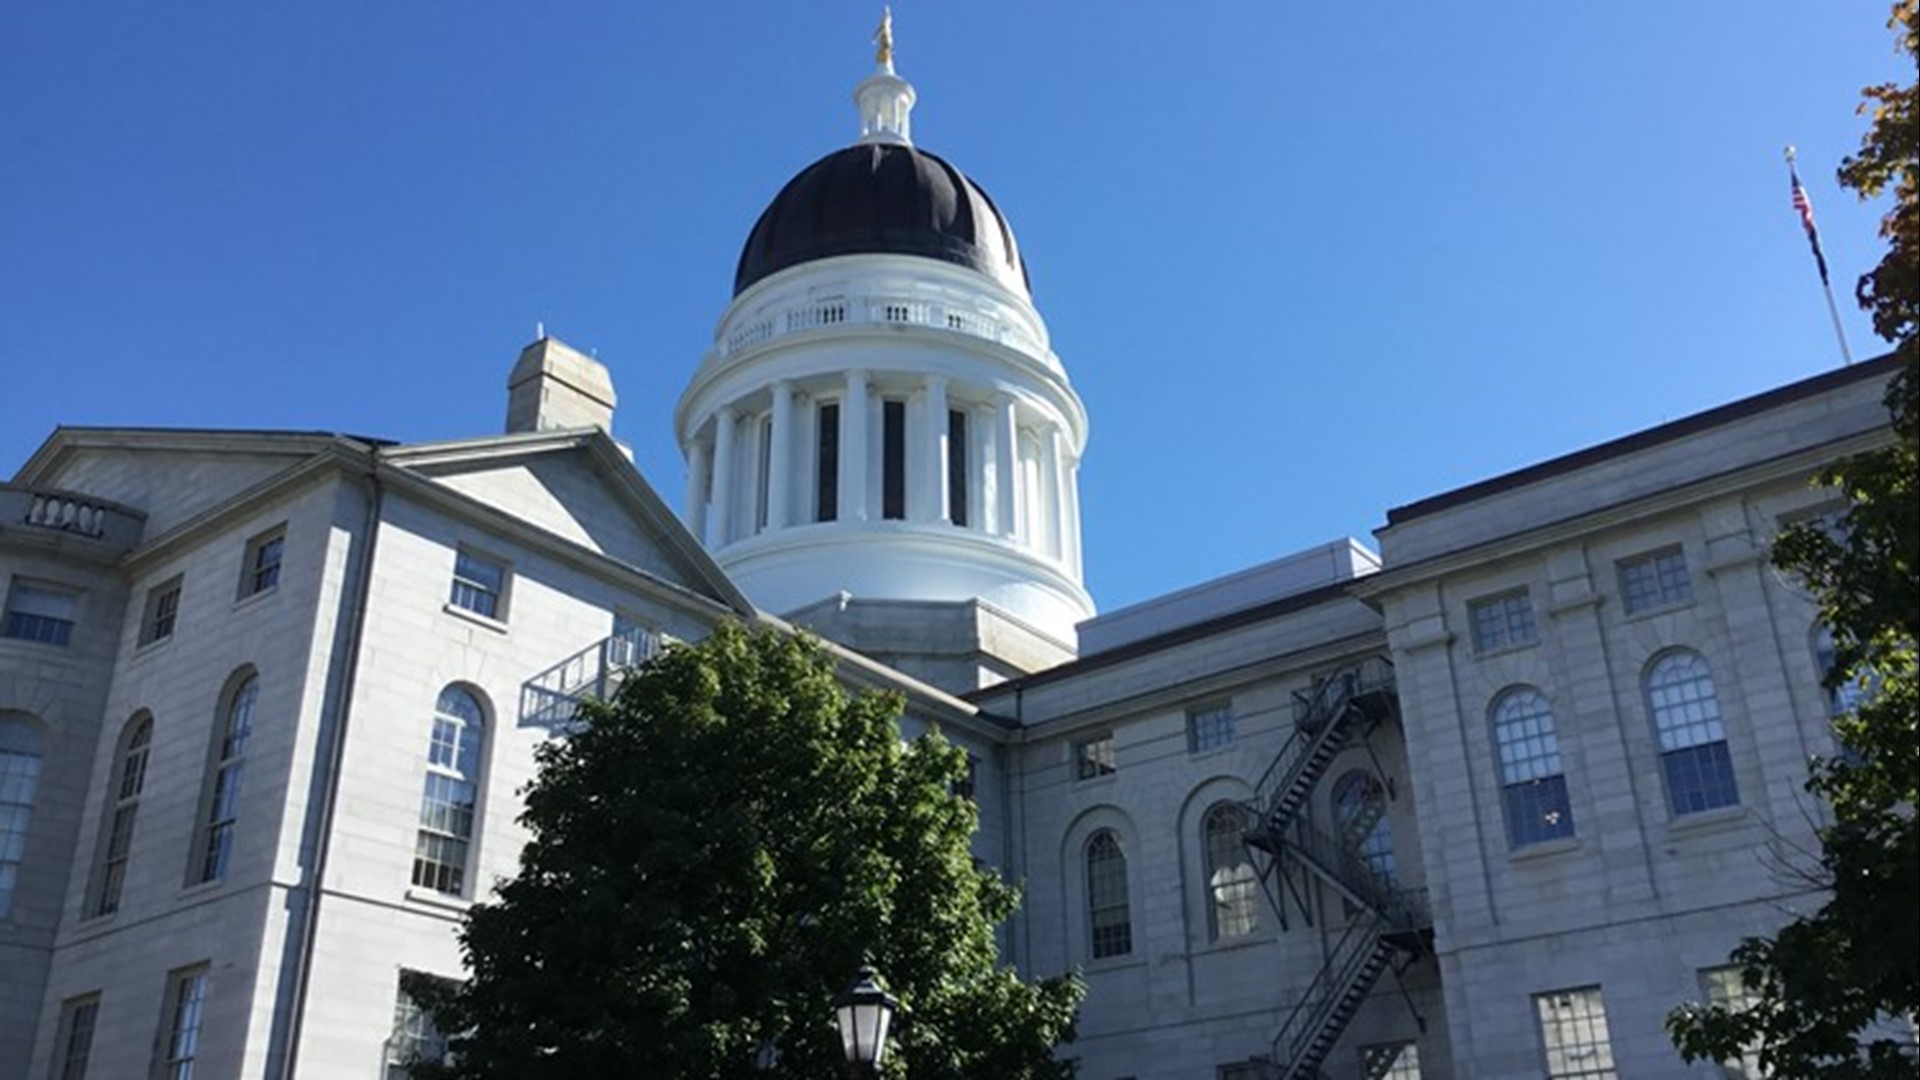 A press conference is taking place outside of the State House at 11 a.m. on Tuesday, April 27 to address affordable housing in Maine.